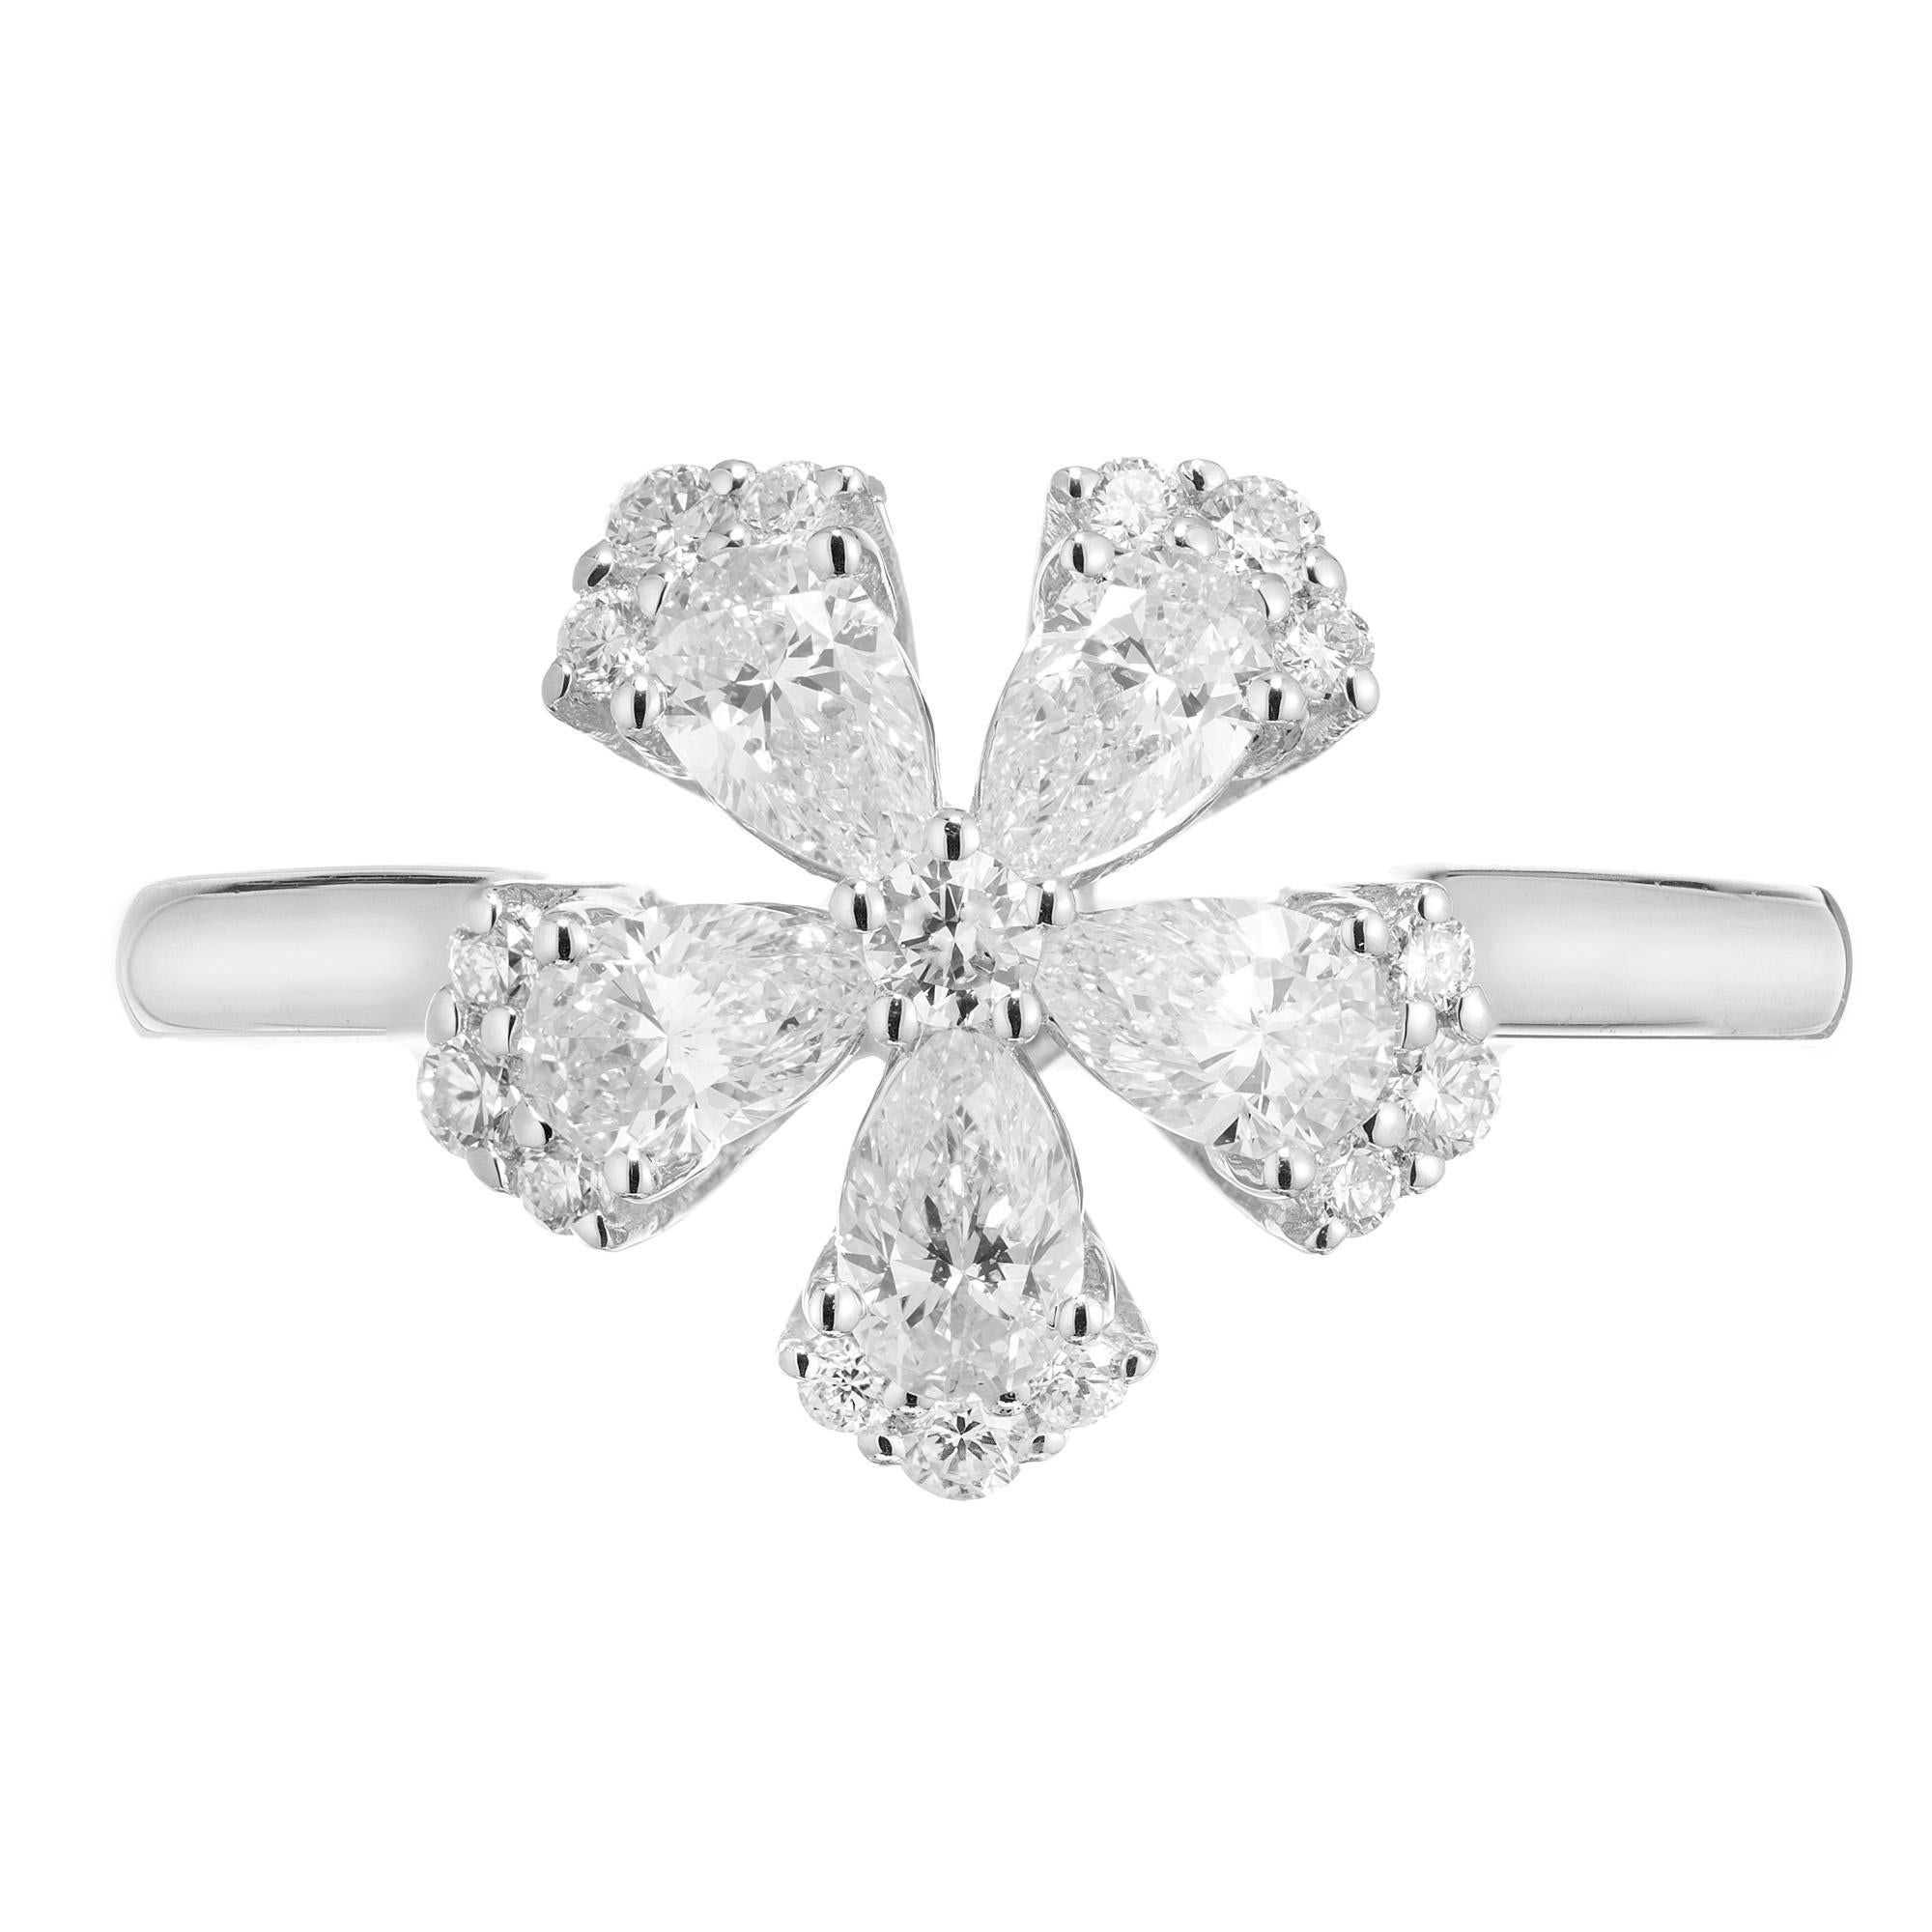 Beautiful brilliant, five pointed flower diamond ring. This unique creation consists 5 pear shaped diamonds totaling .73cts. Each diamond has a semi halo of three round brilliant cut diamonds. One round brilliant cut diamond sits in the middle of